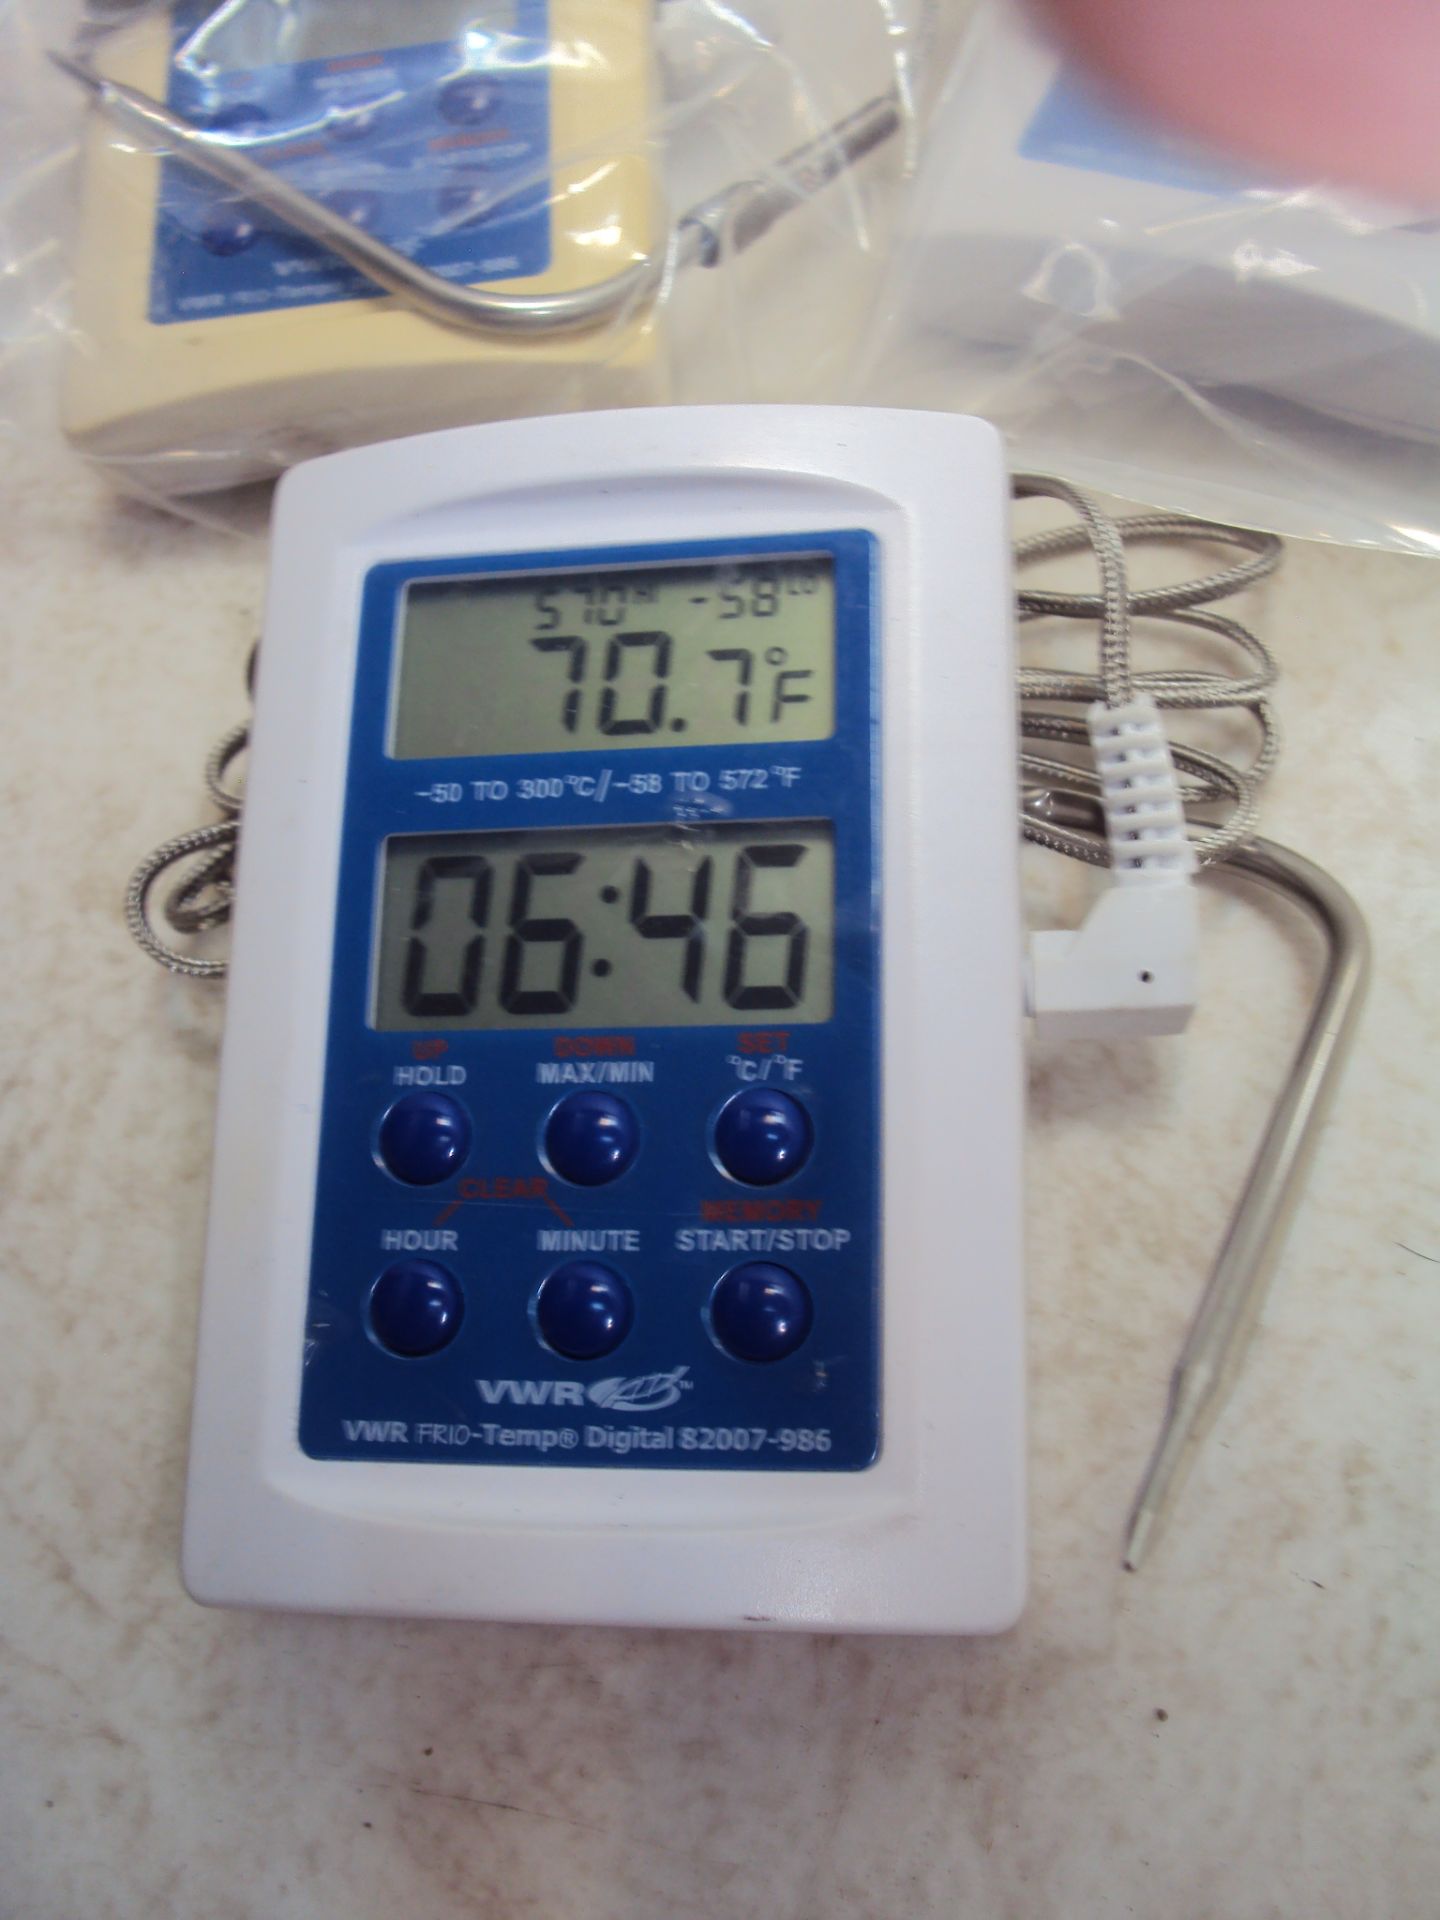 (14) VWR Frio-Temp 82007-986 Temperature Gages w/ Thermocouple - Image 3 of 4